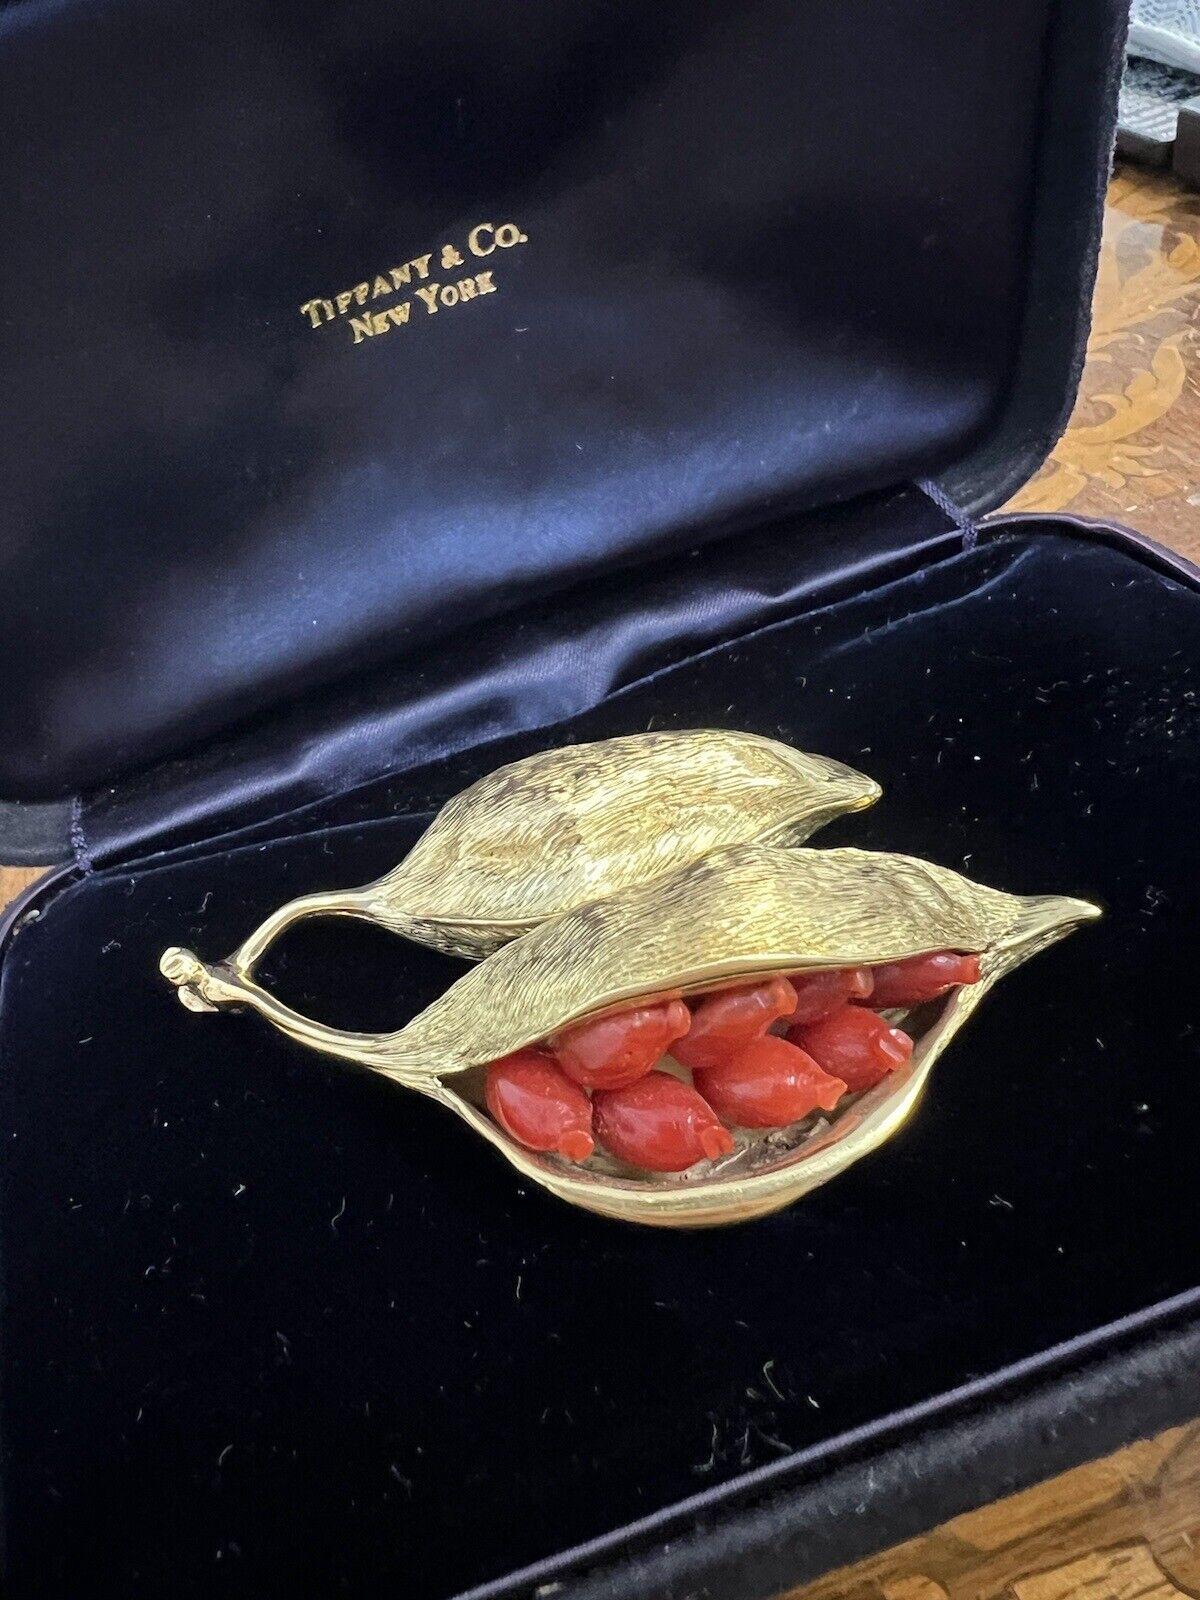 Tiffany & Co. Angela Cummings 18k Yellow Gold & Coral Leaf Brooch w/Box Vintage Circa 1960s

Here is your chance to purchase a beautiful and highly collectible designer brooch.  

The brooch is vintage from the 1960s.  The length is 2.75 inches. 